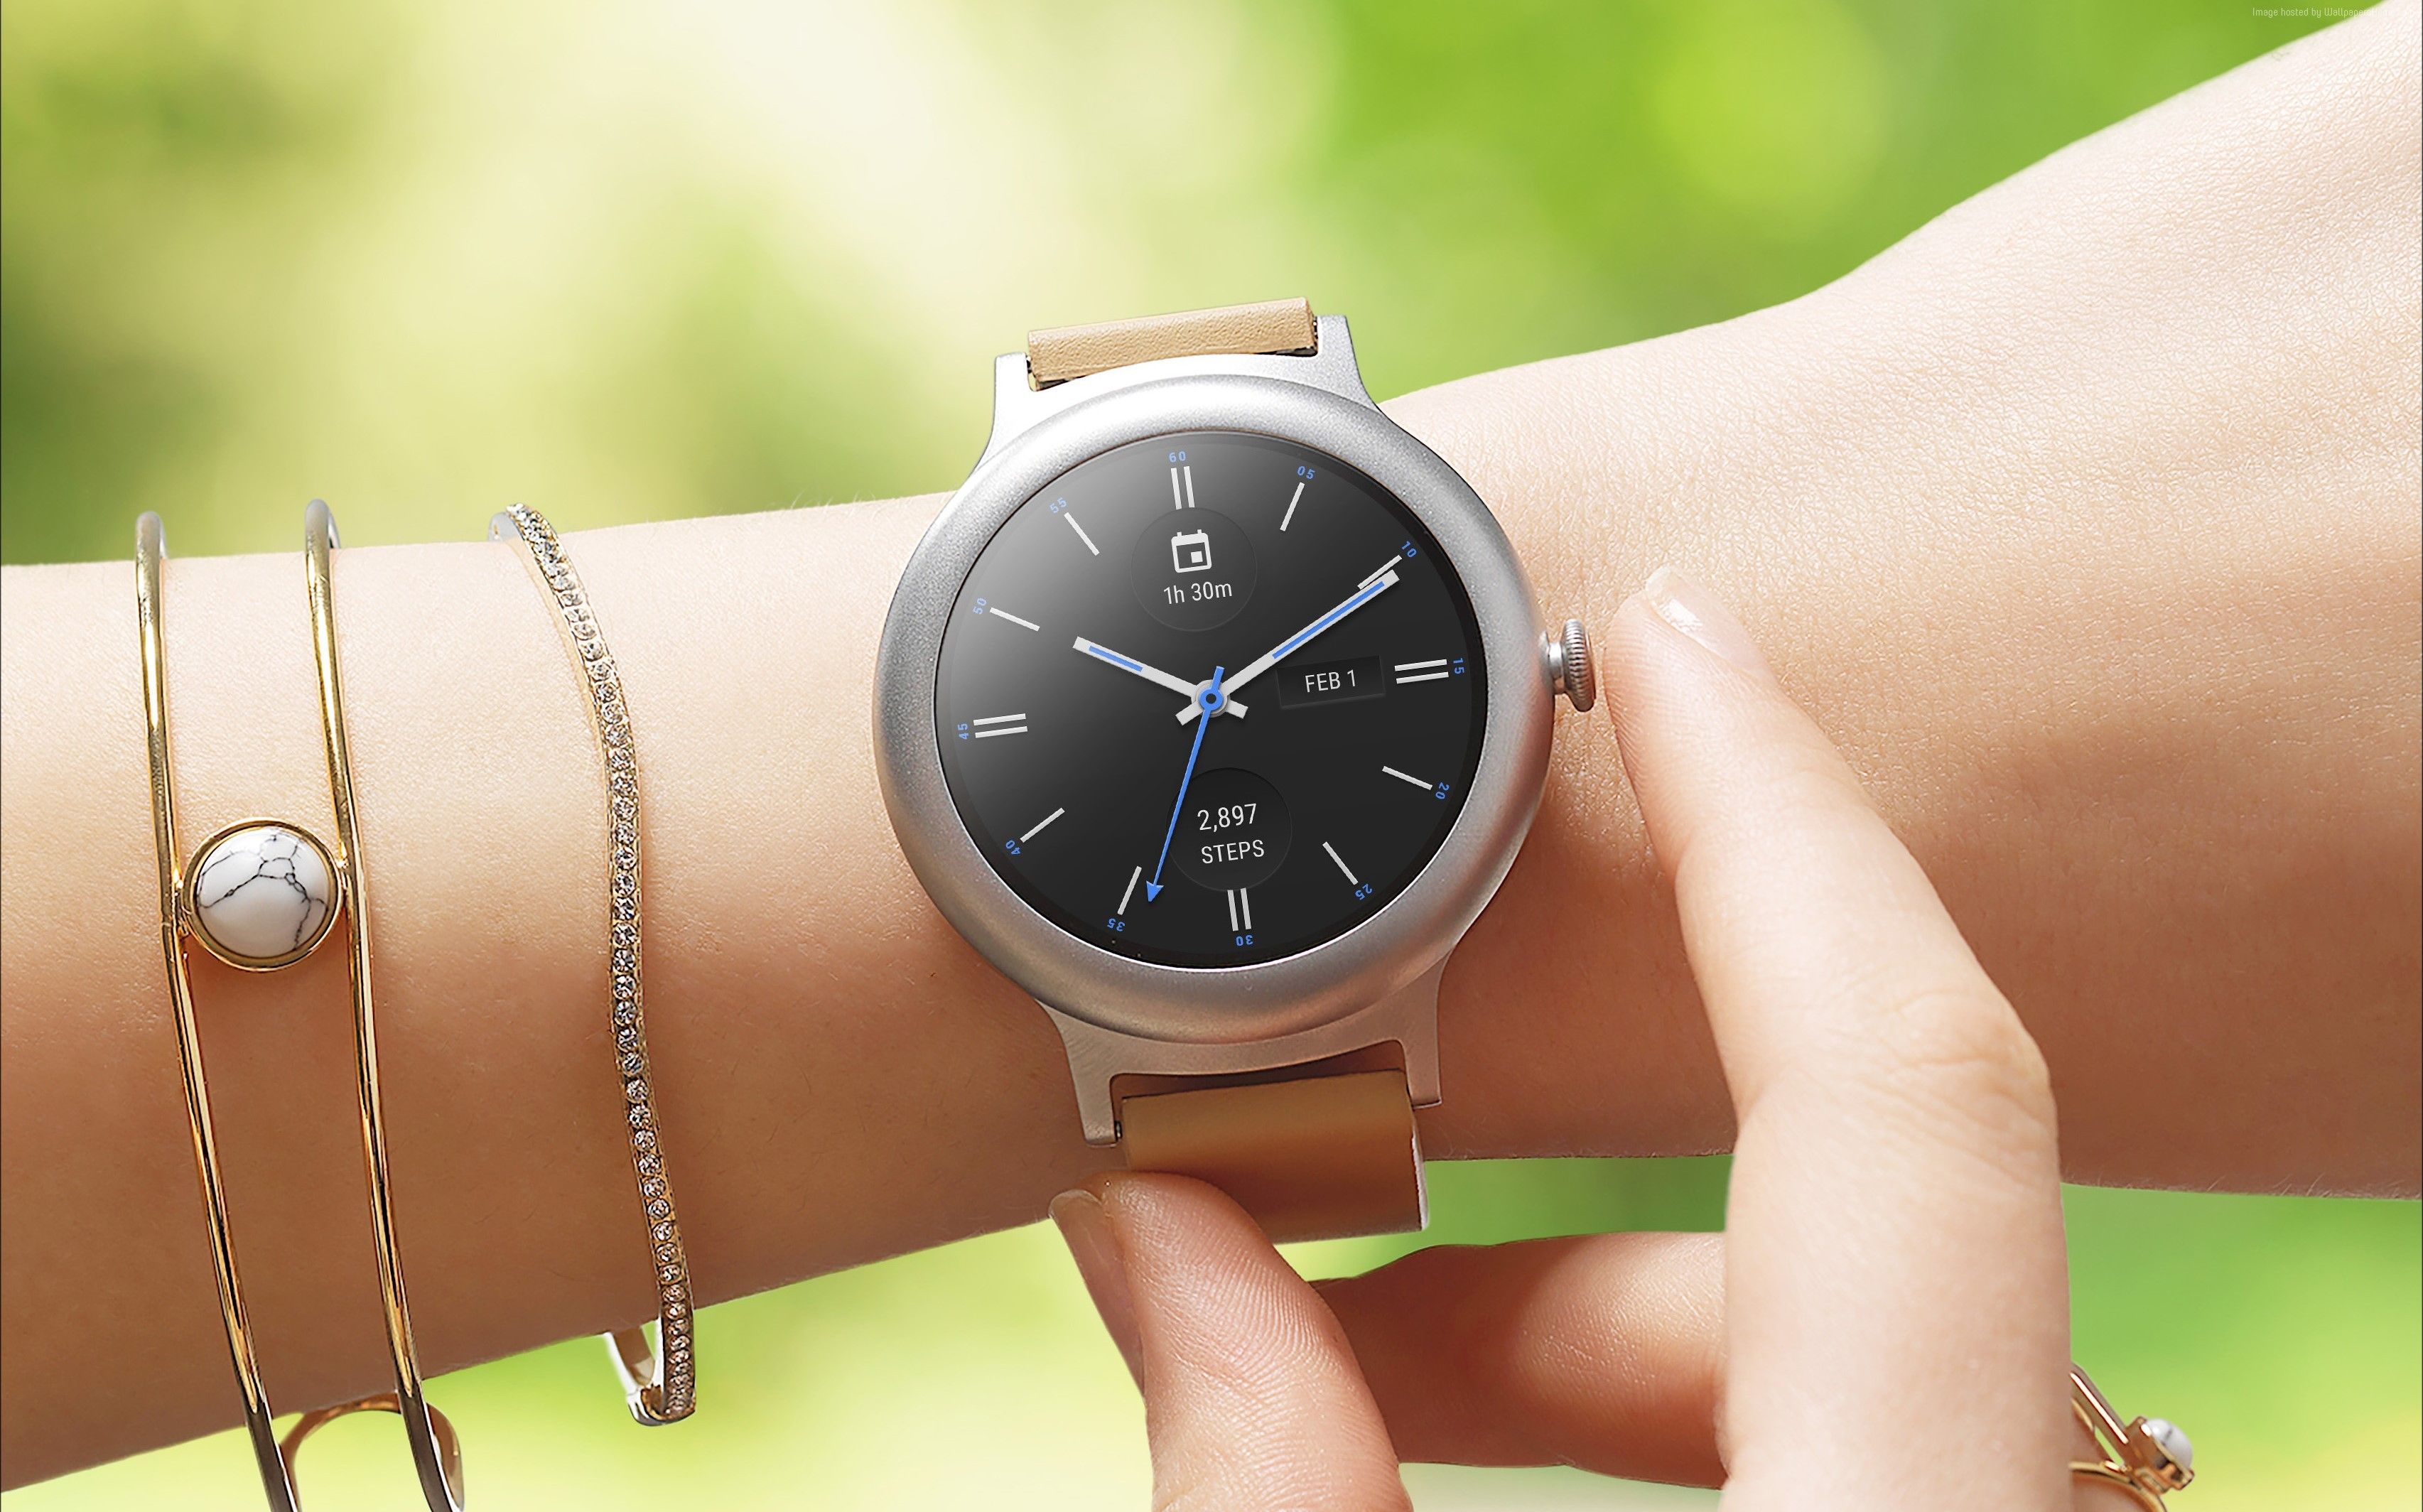 #LG Watch Style, #best smartwatches, #MWC #smartwatches for women. Mocah.org HD Wallpaper